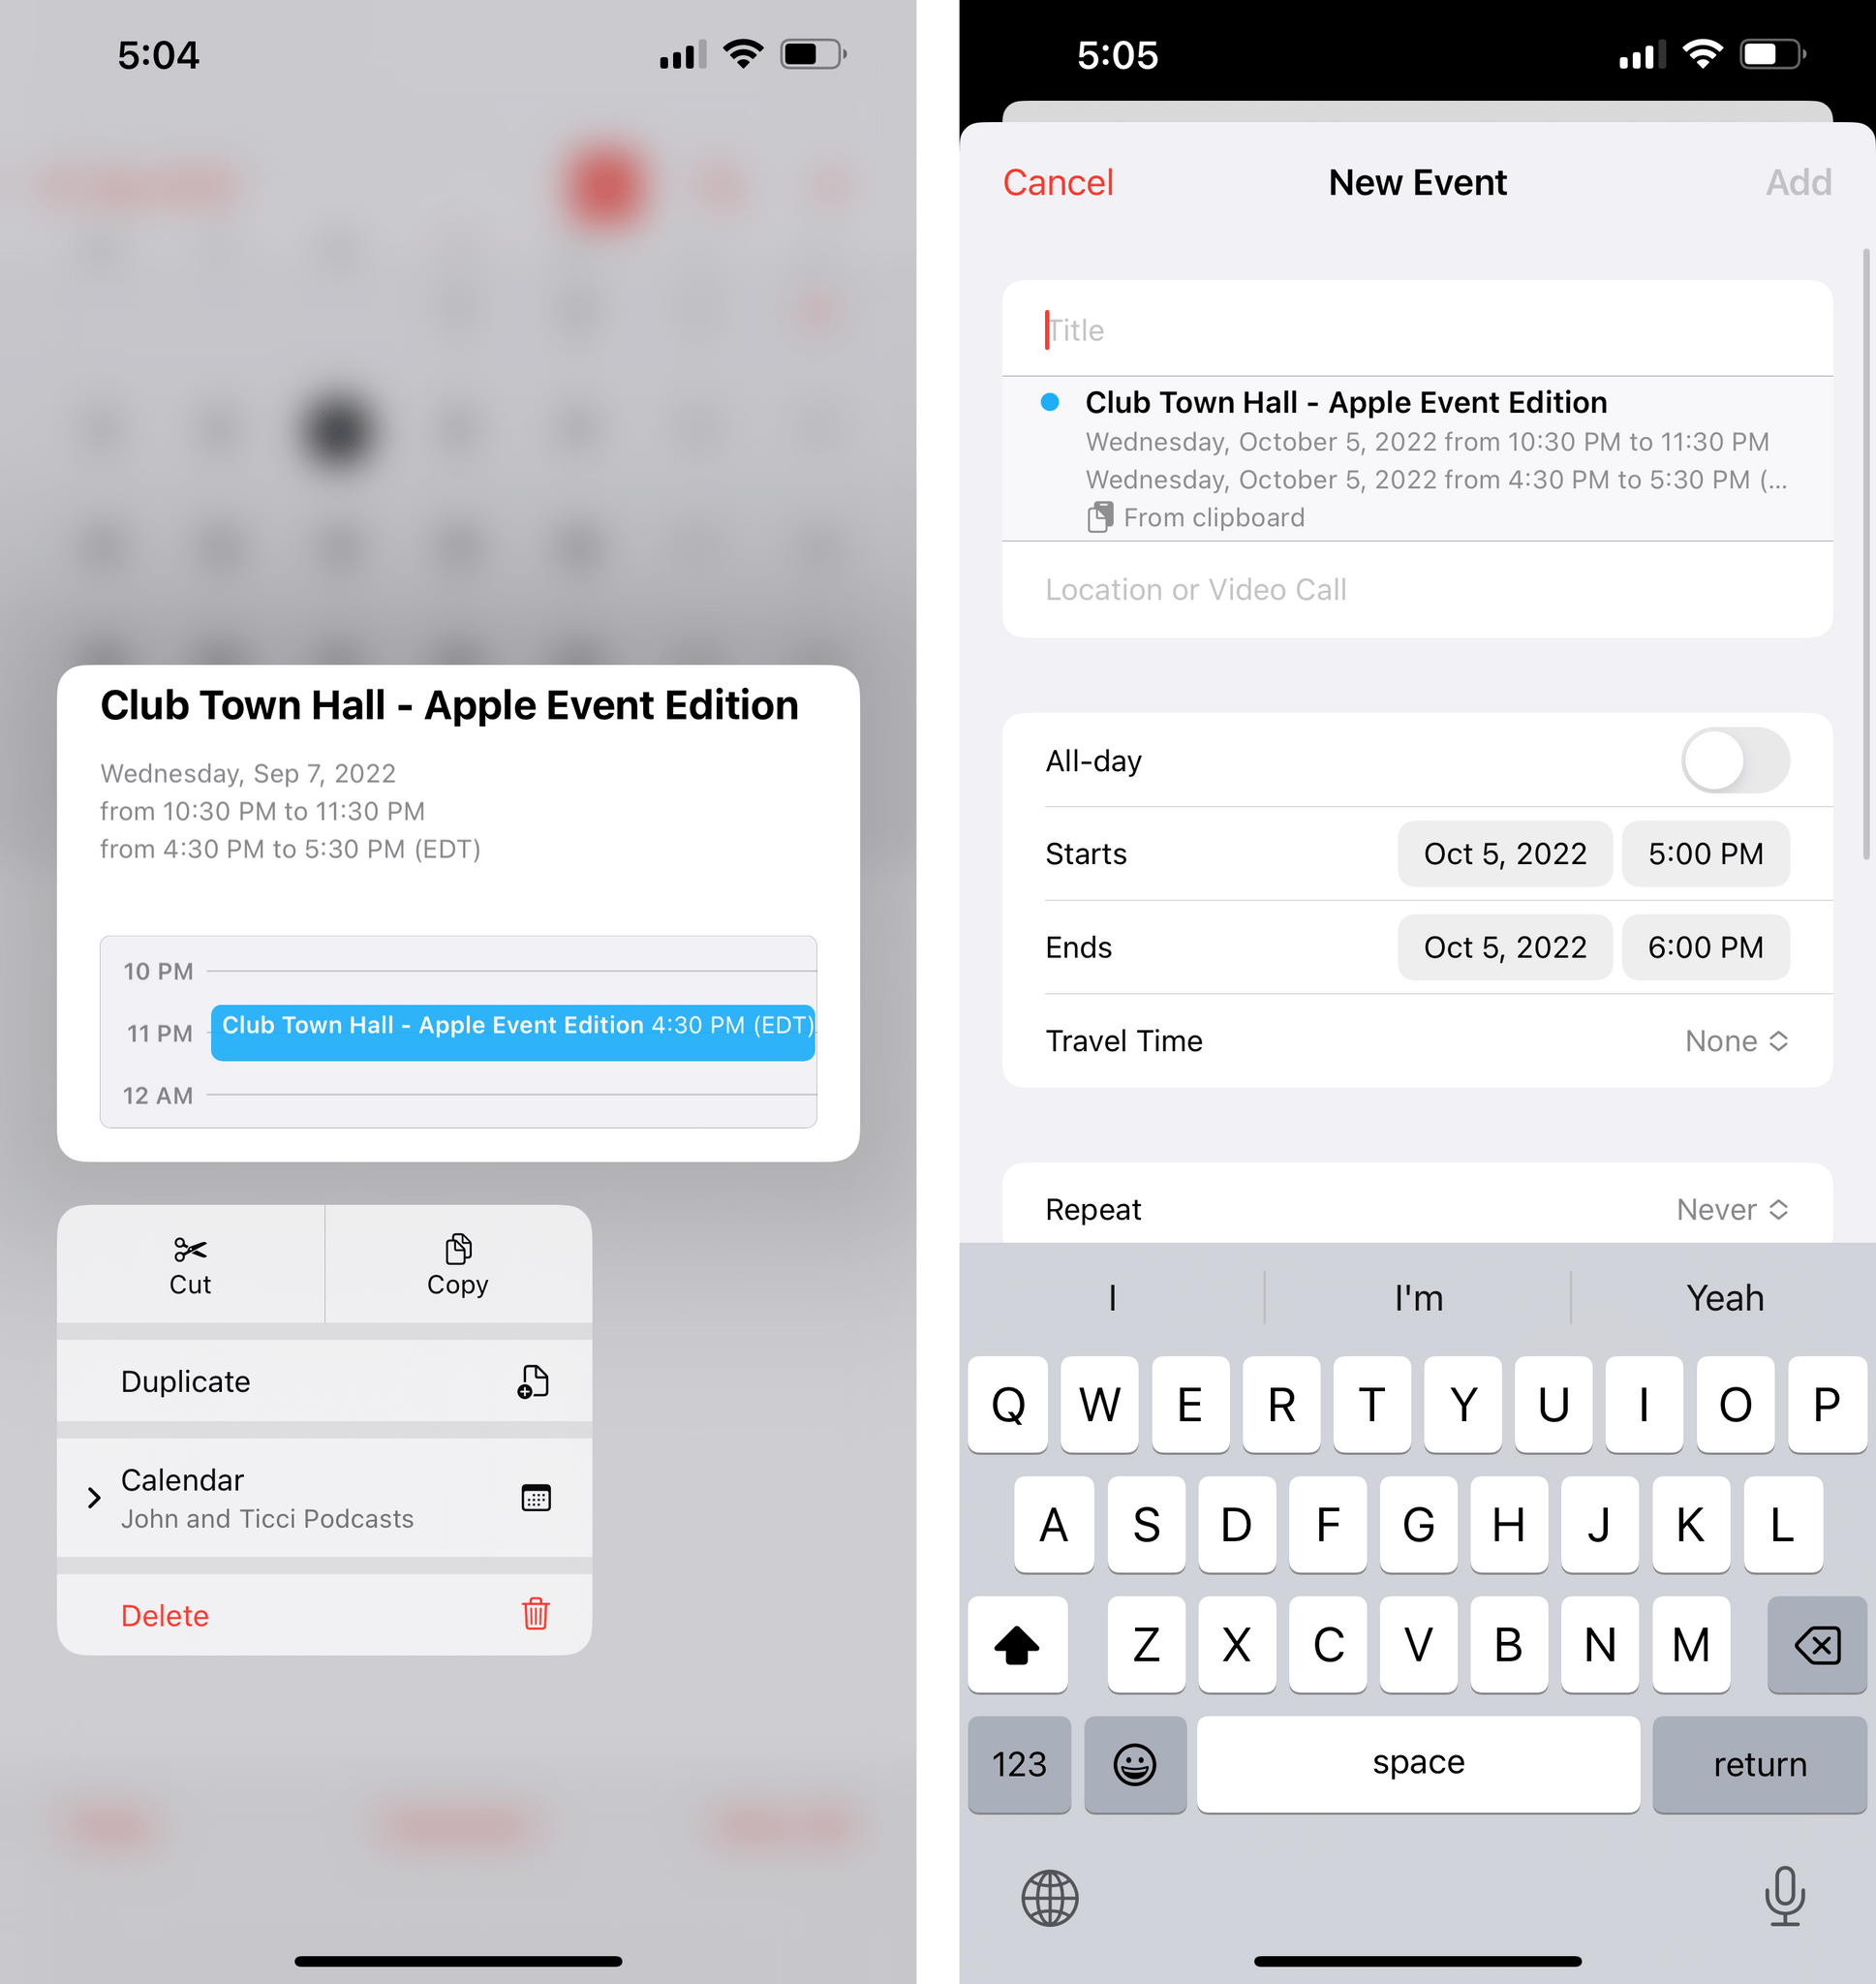 Copying and pasting events in iOS 16.